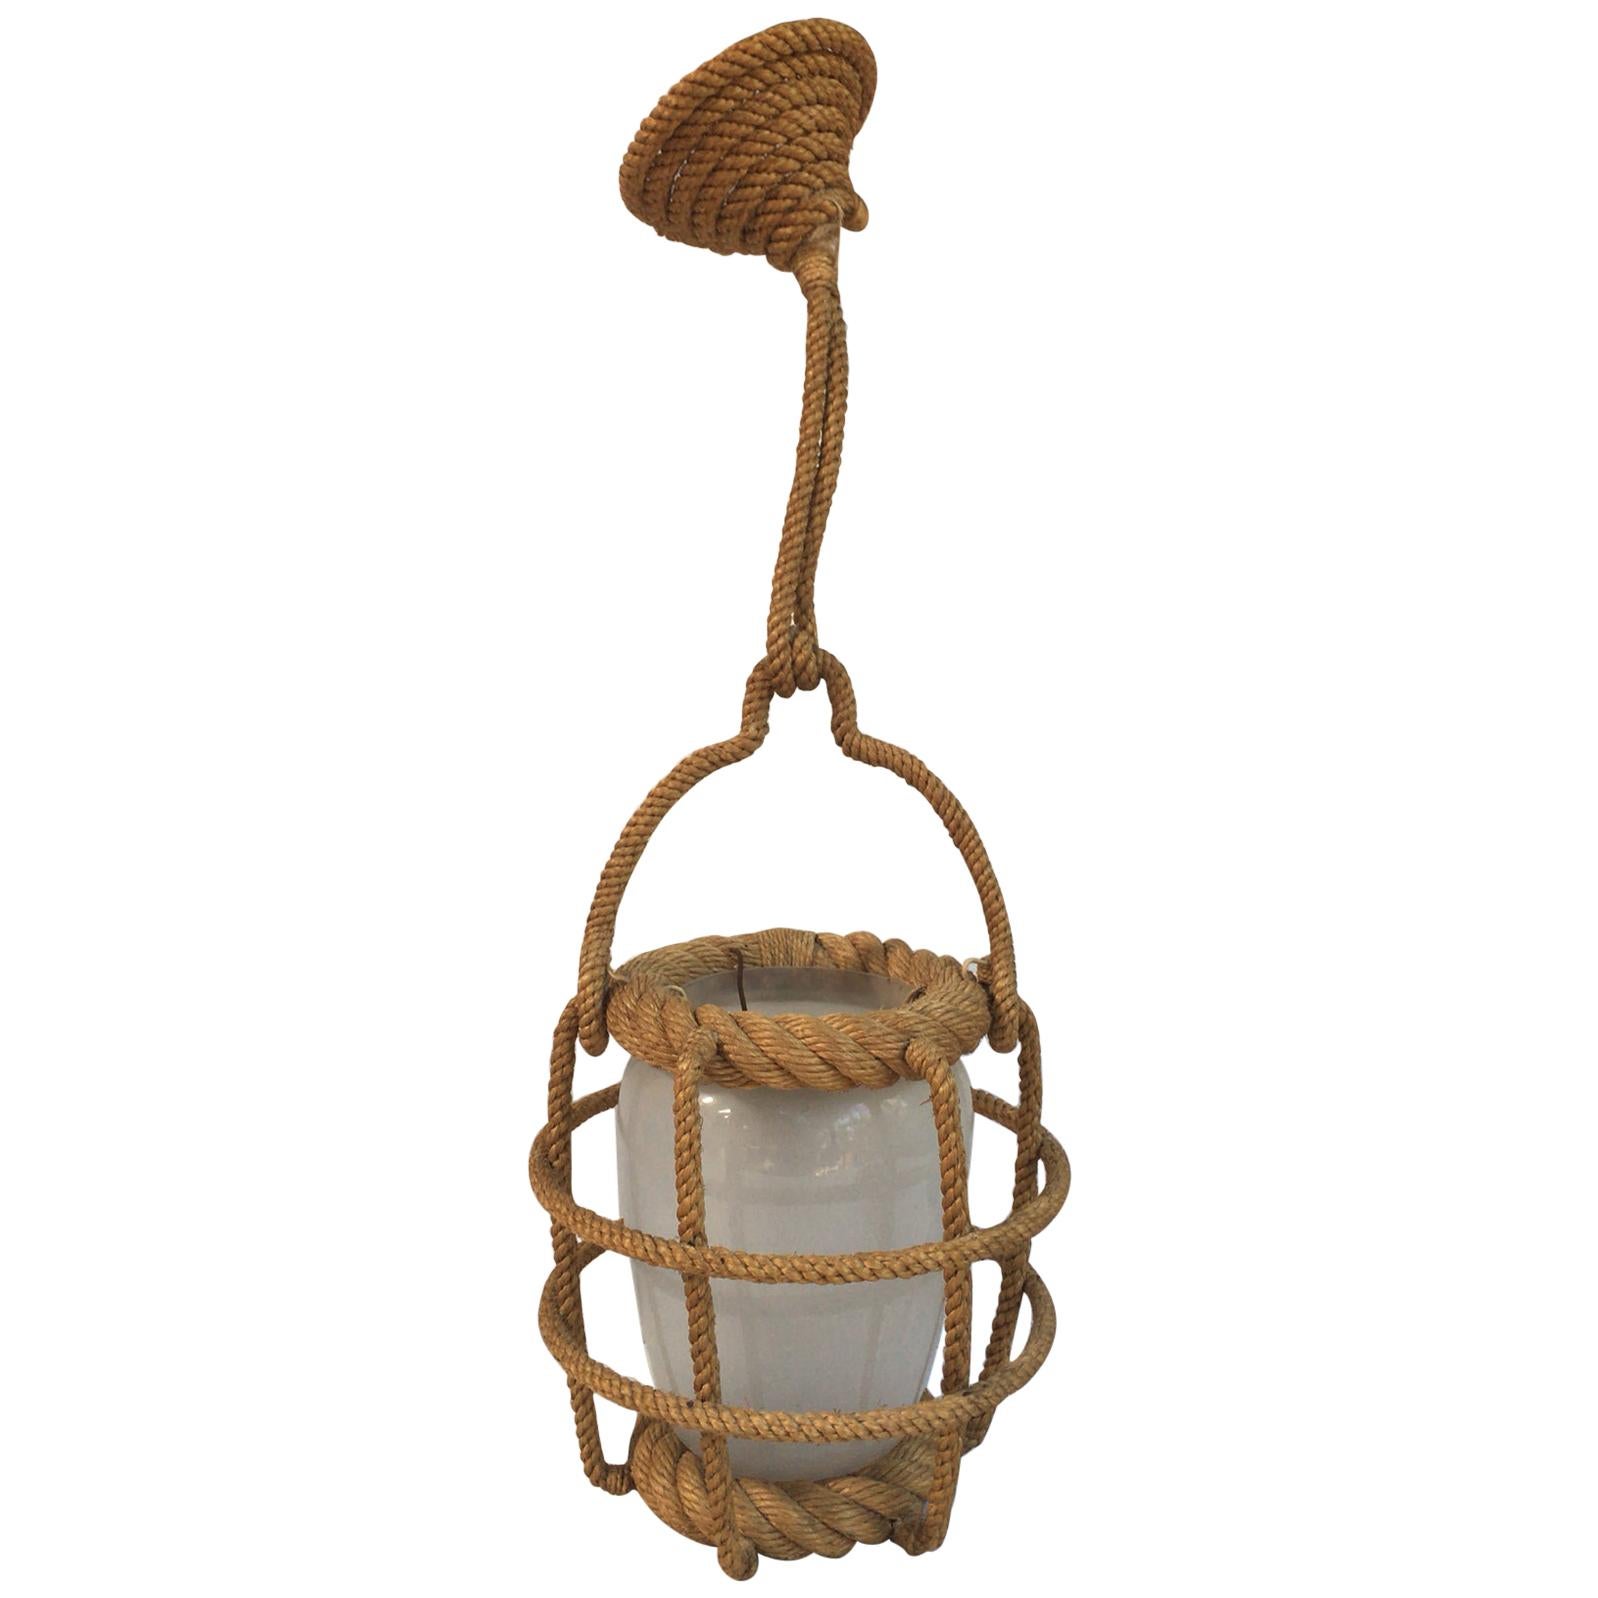 Rope circular lantern chandelier Audoux Minet, circa 1960 with white opaline glass.
Measures: Height / 20 inches with the rope, diameter / 7.5 on 8 inches.
Nautical style.